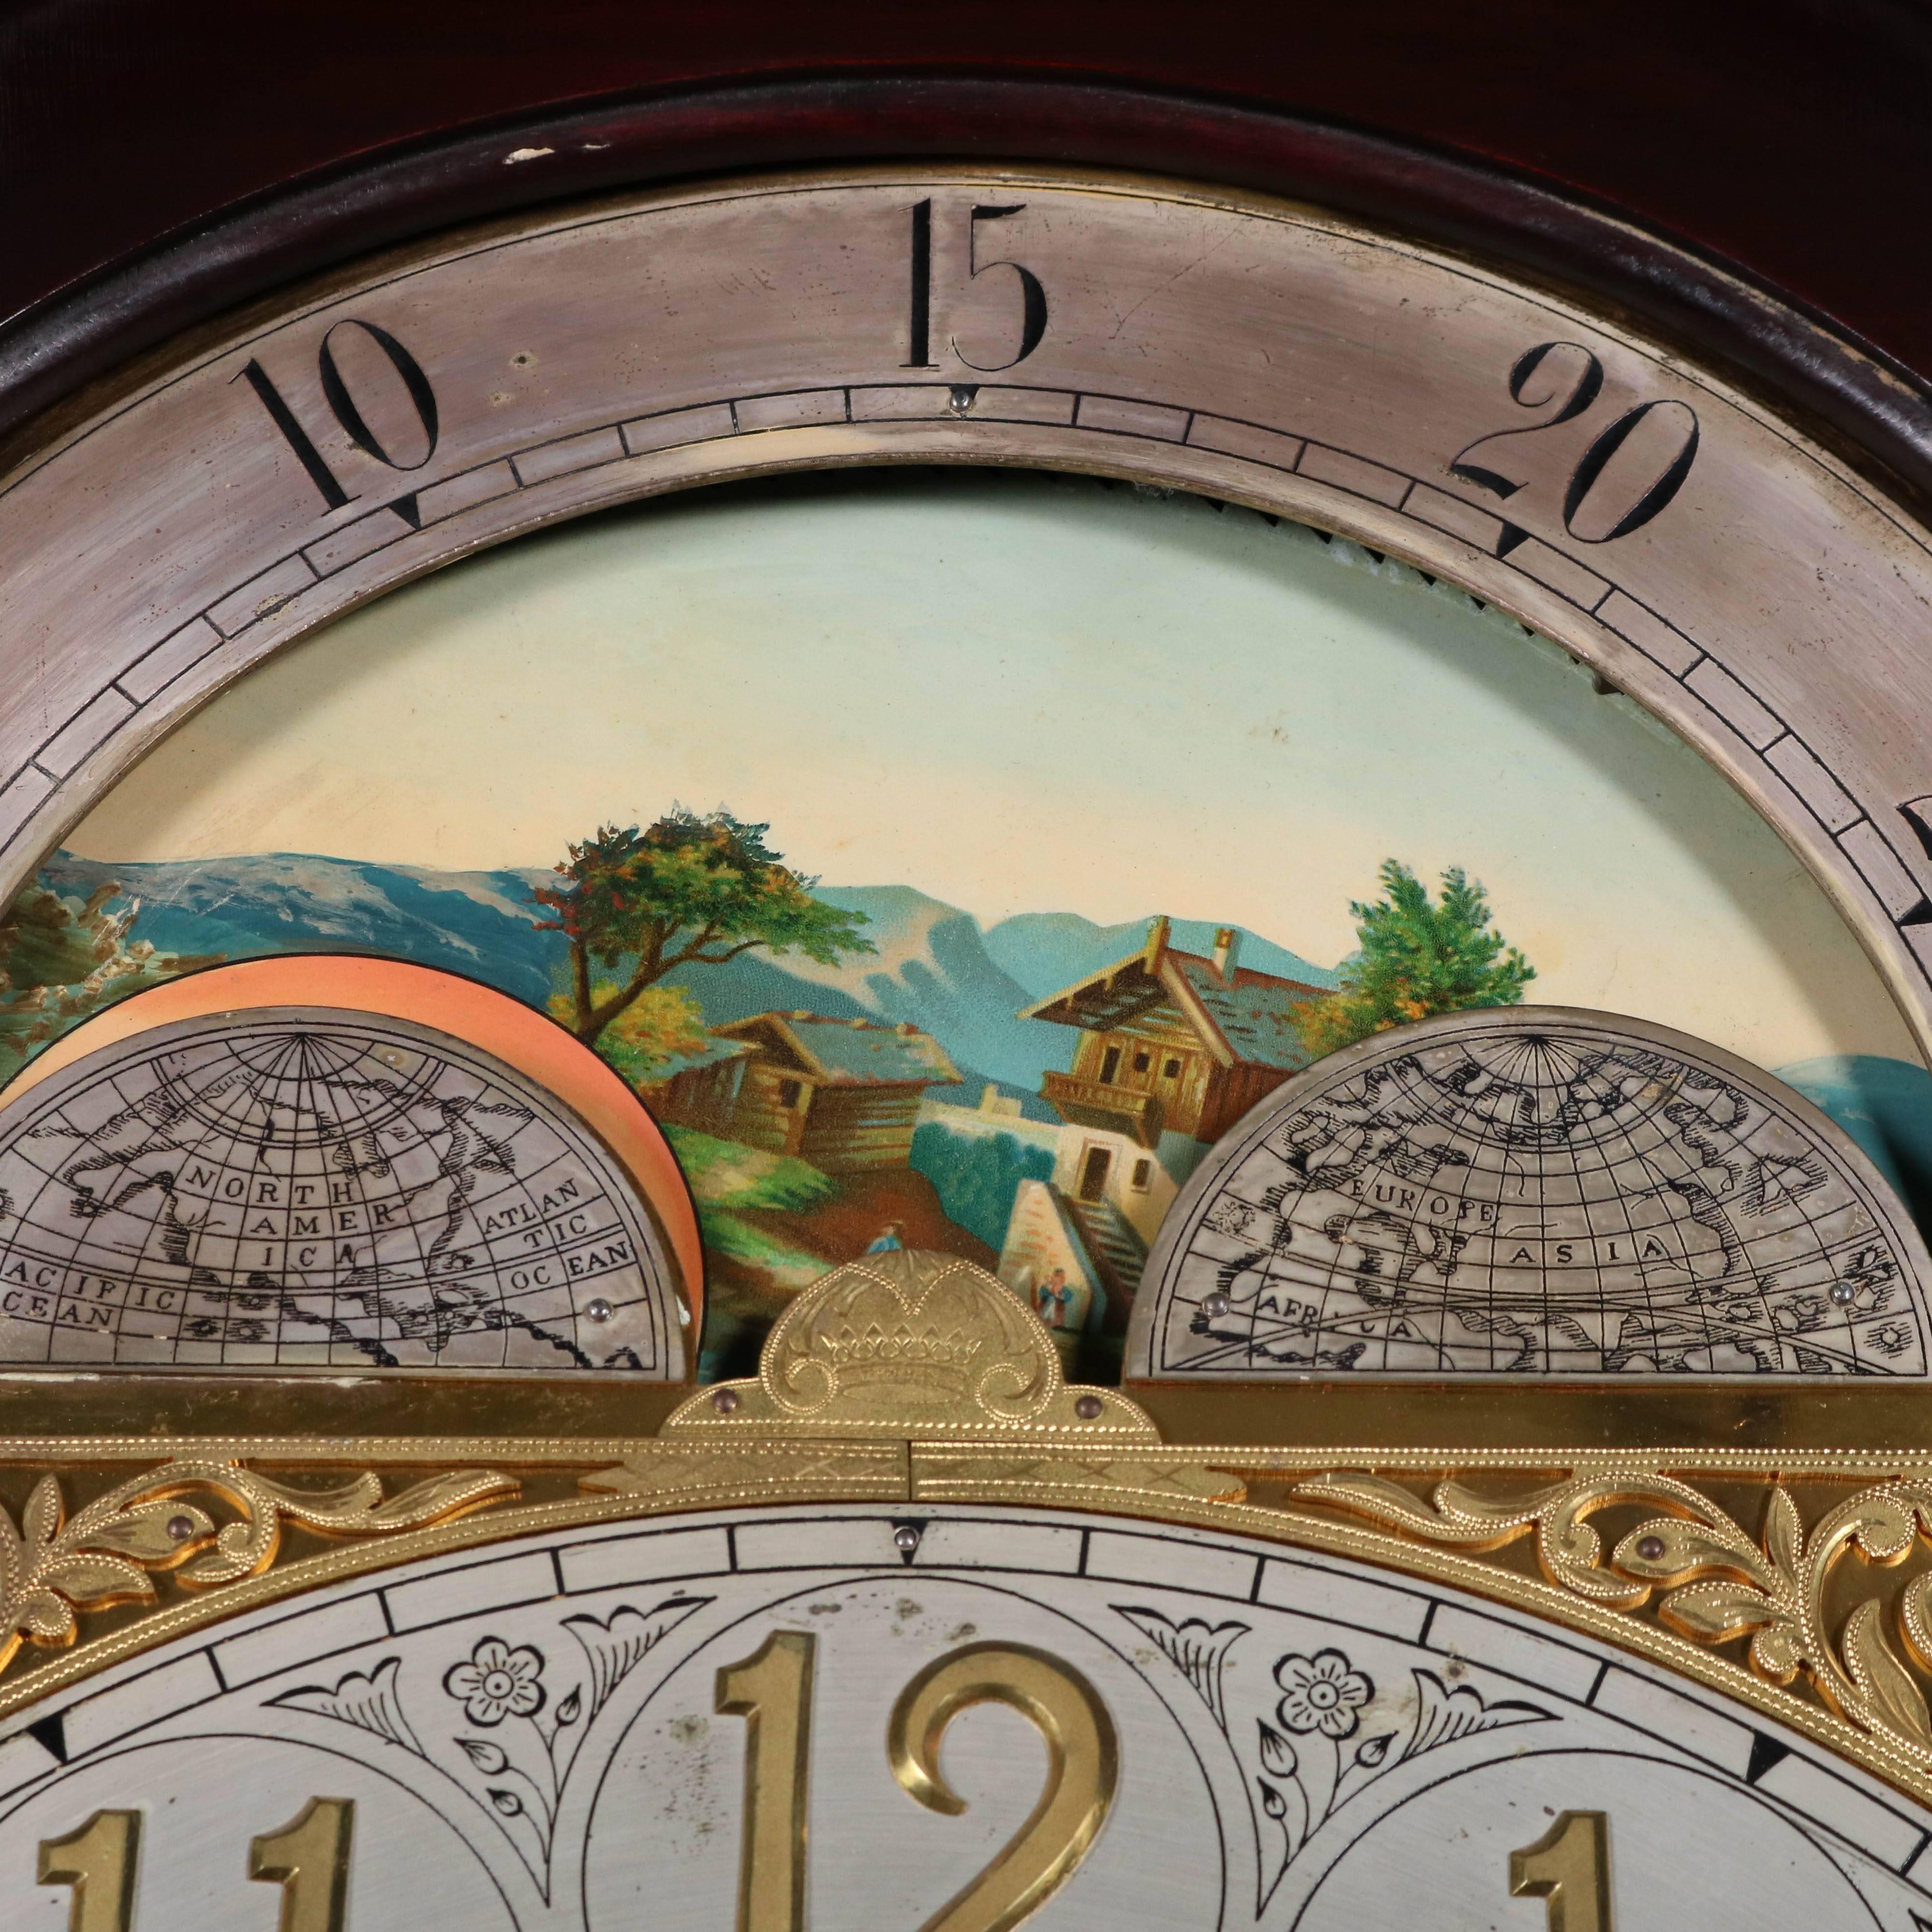 Antique Herschede tall case clock features mahogany case with satinwood inlay, heavily adorned moon phase face with mountain scene, deep and rich chime, includes key and pendulum, early 20th century

Measures: 88" H.